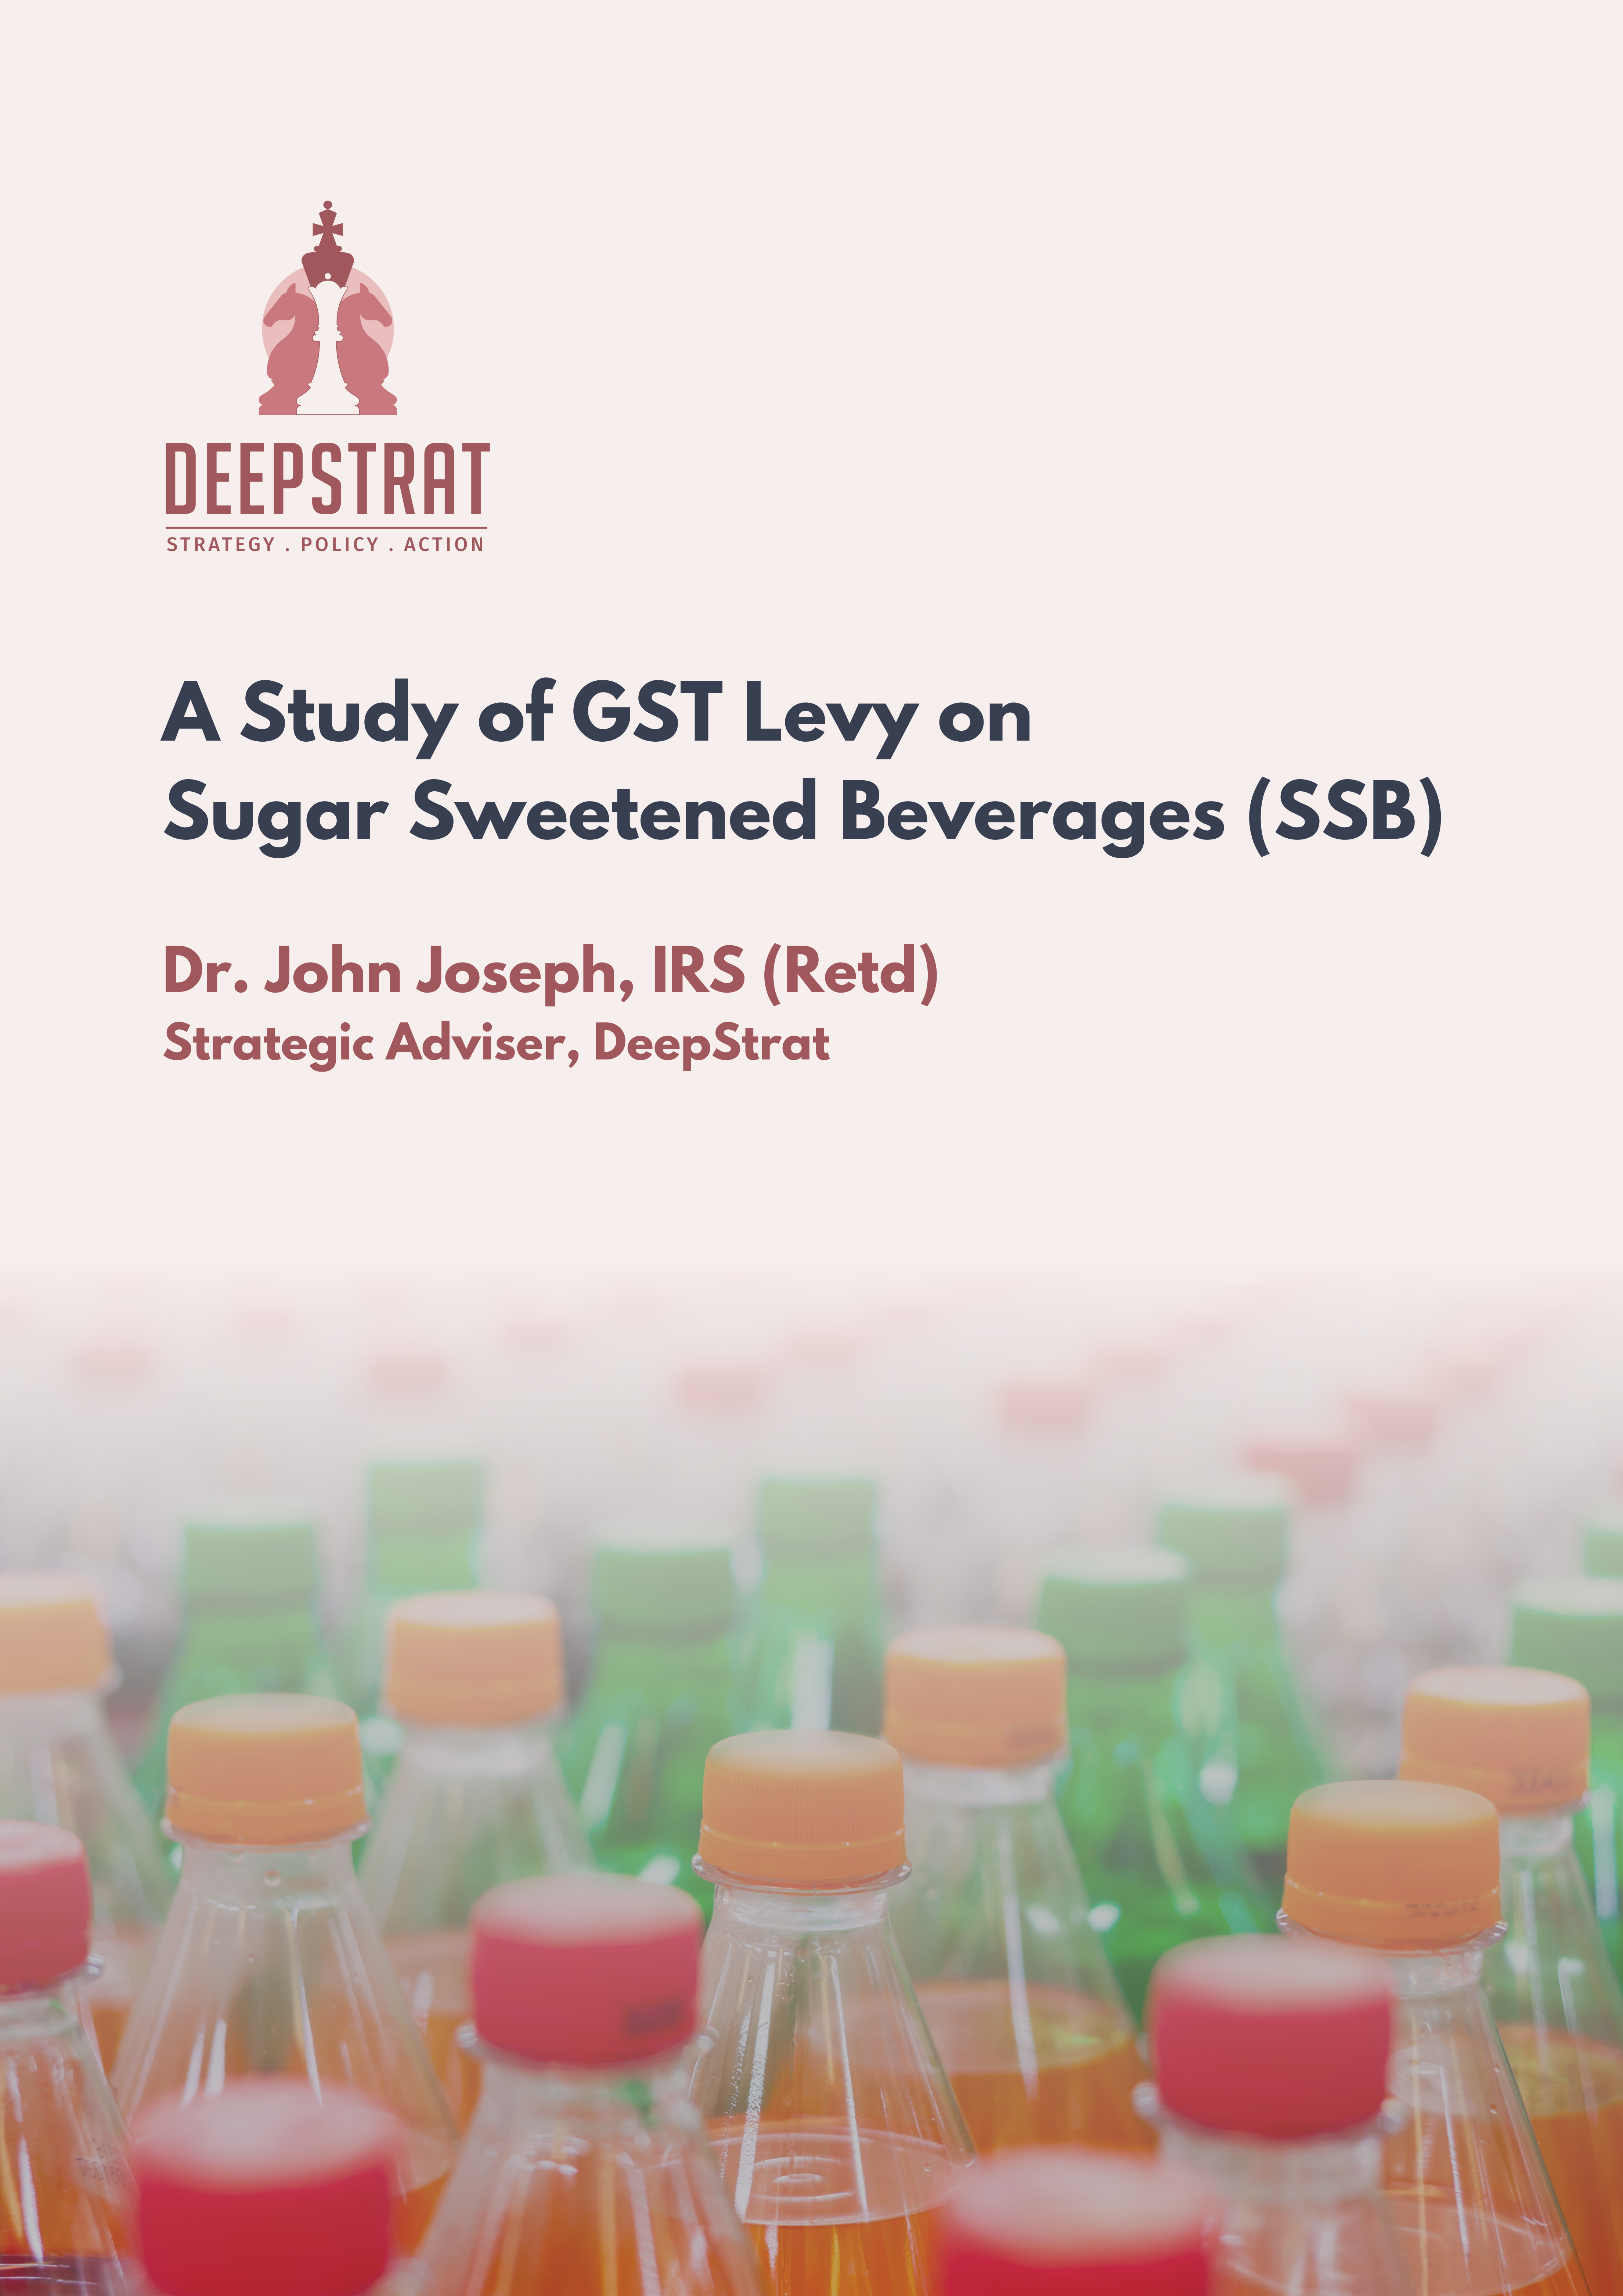 A Study of GST Levy on Sugar Sweetened Beverages